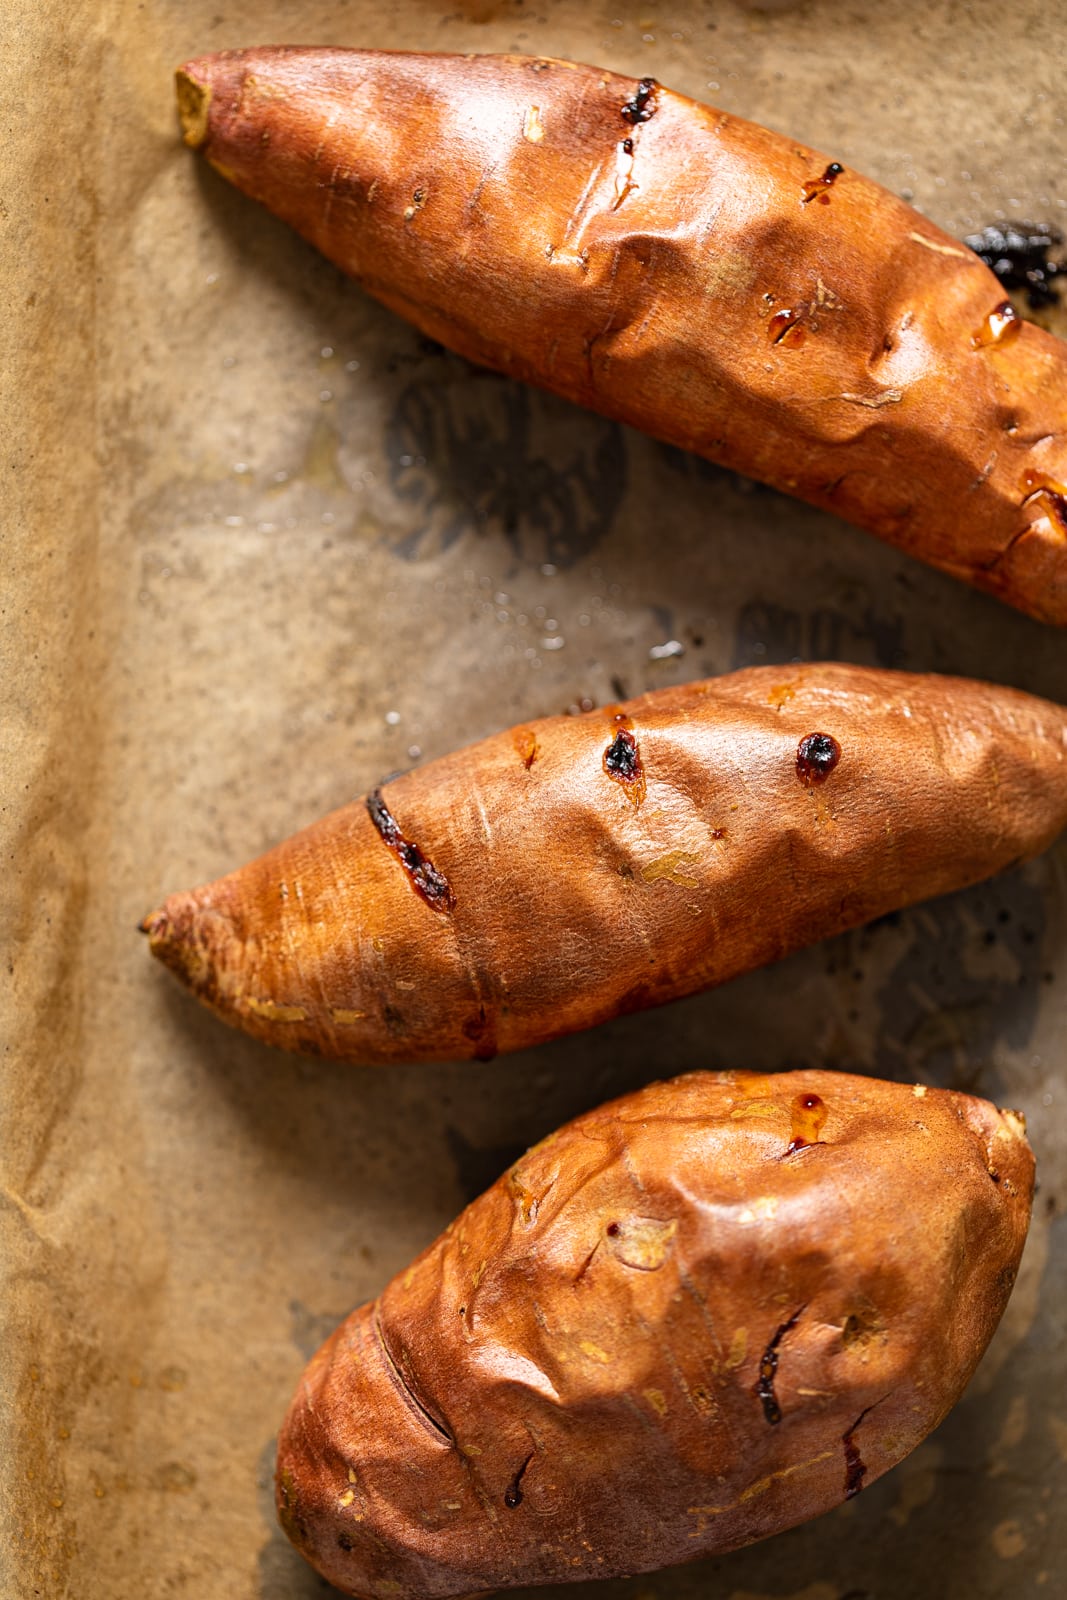 Roasted sweet potatoes on parchment paper, ready to become the perfect weeknight vegan meal